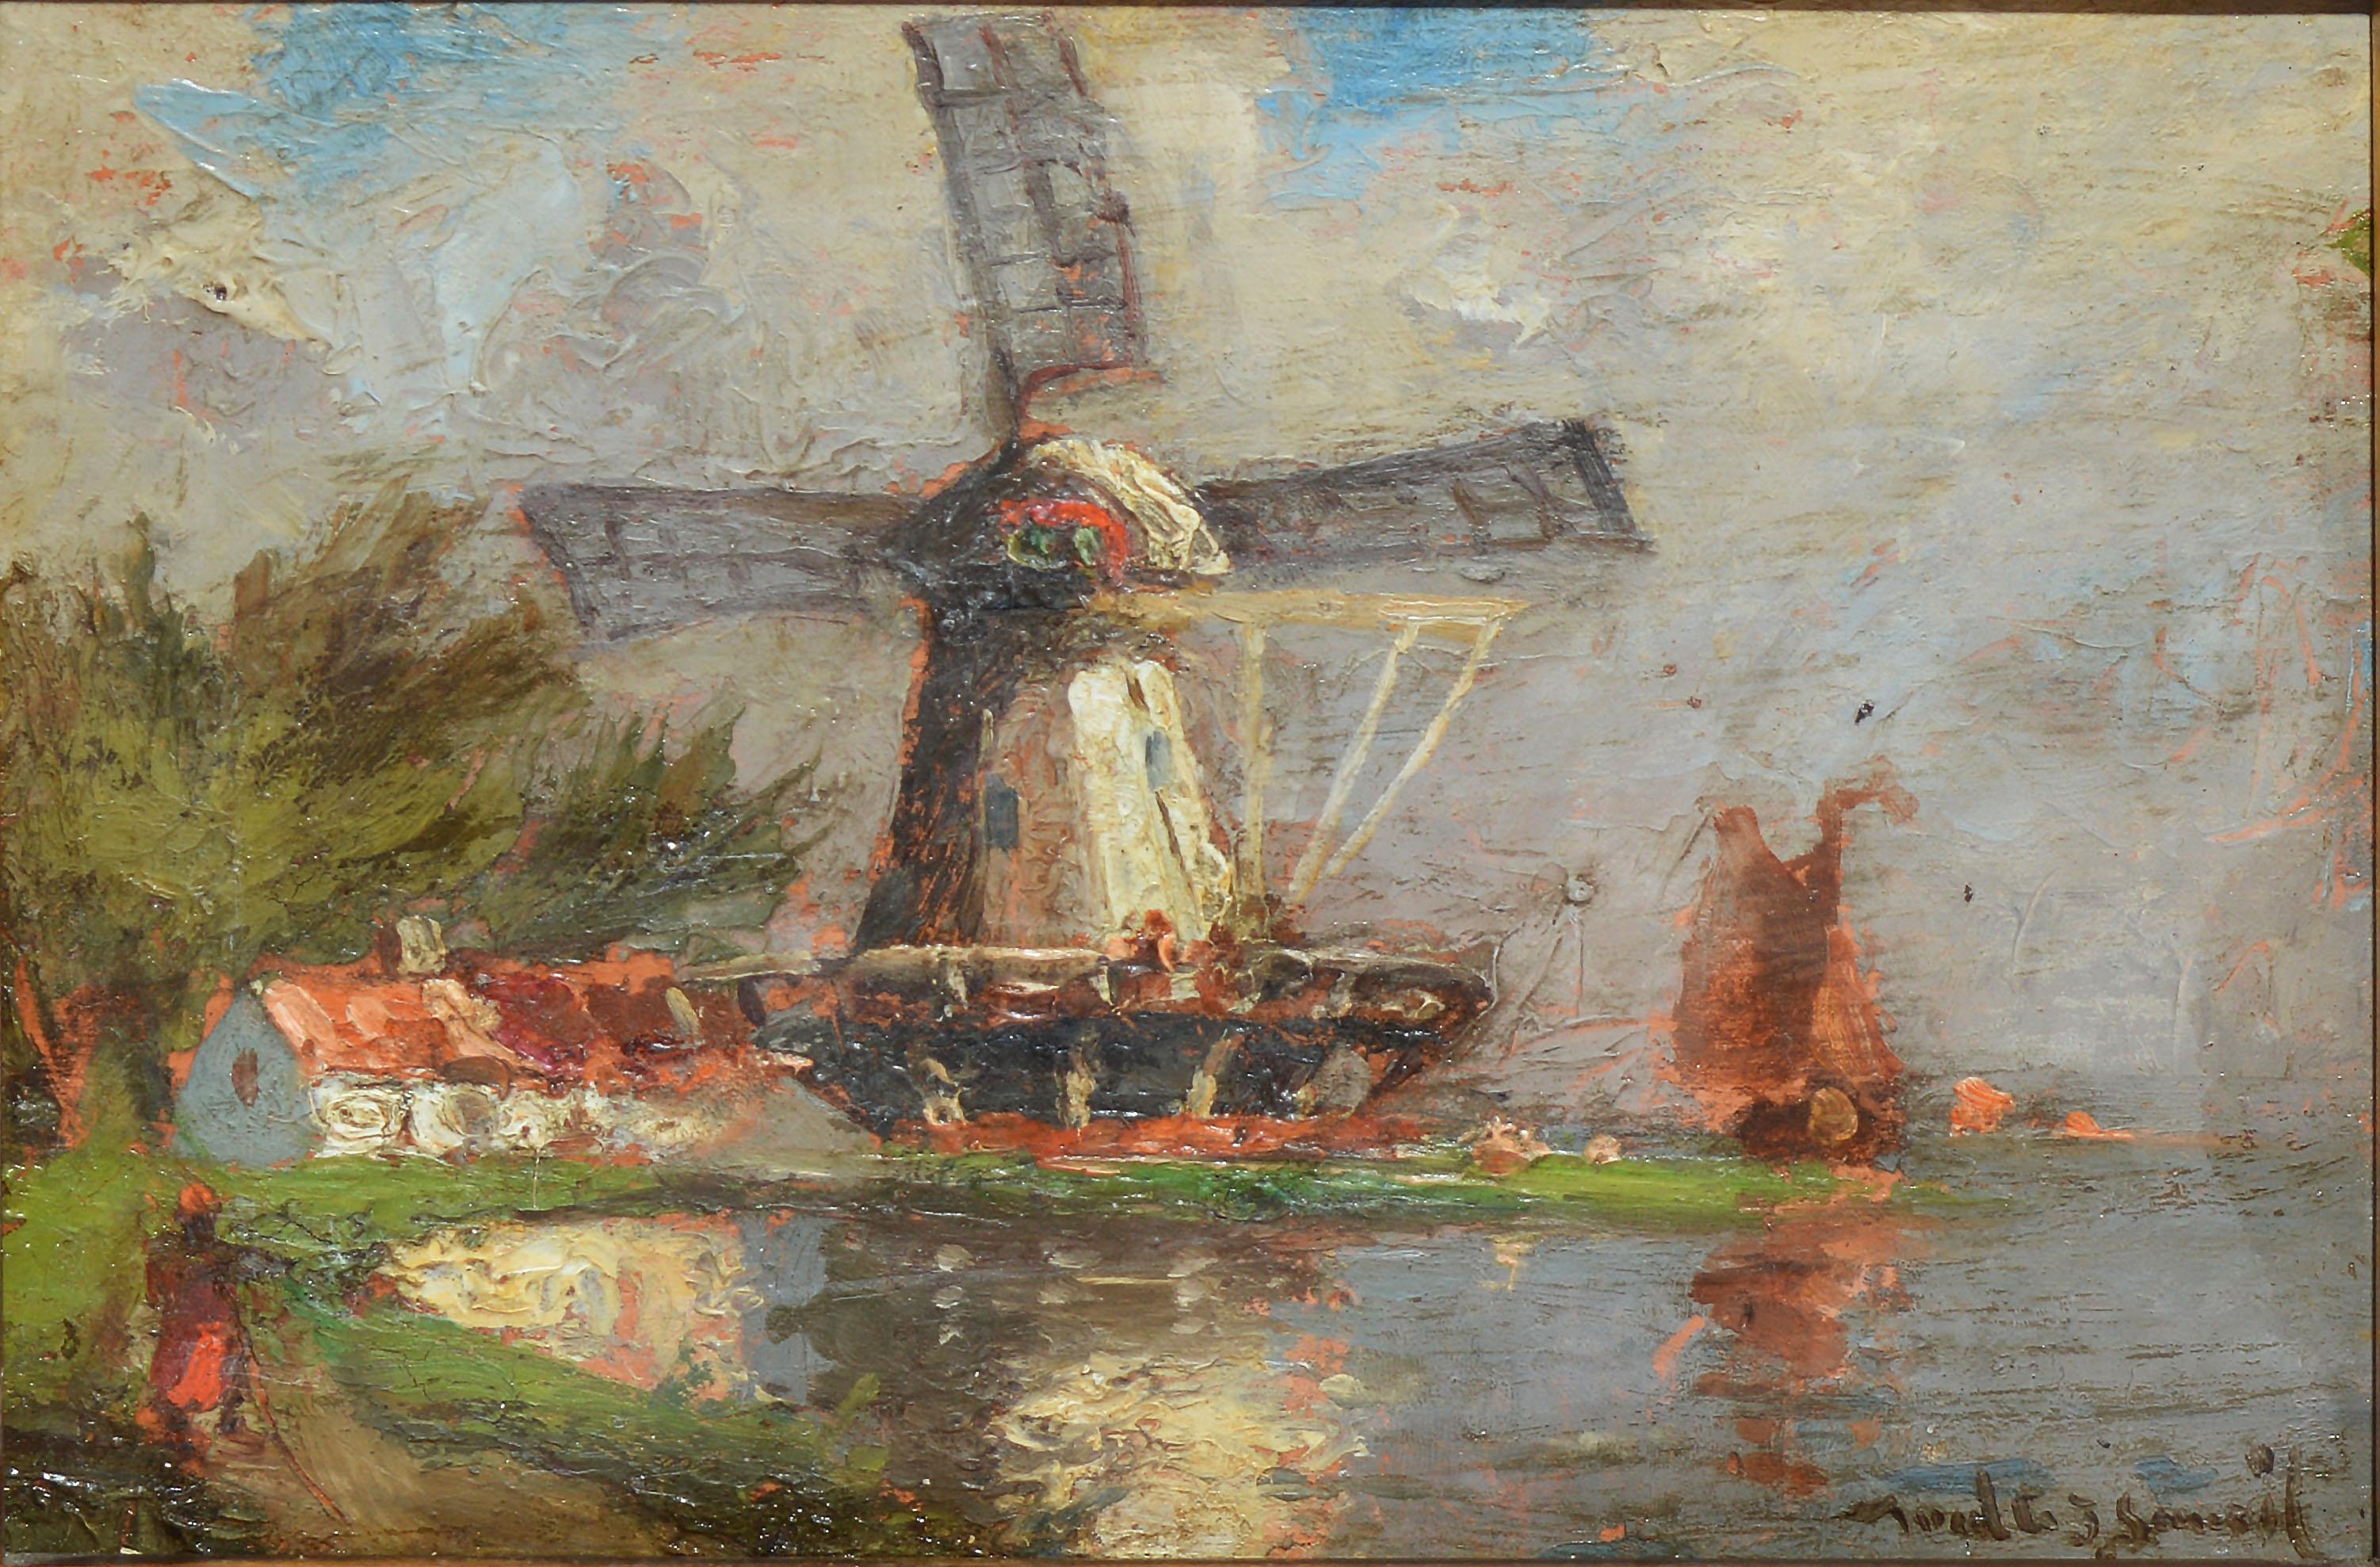 Antique Dutch Windmill Landscape Oil Painting with Figures by Walter Lansil 1